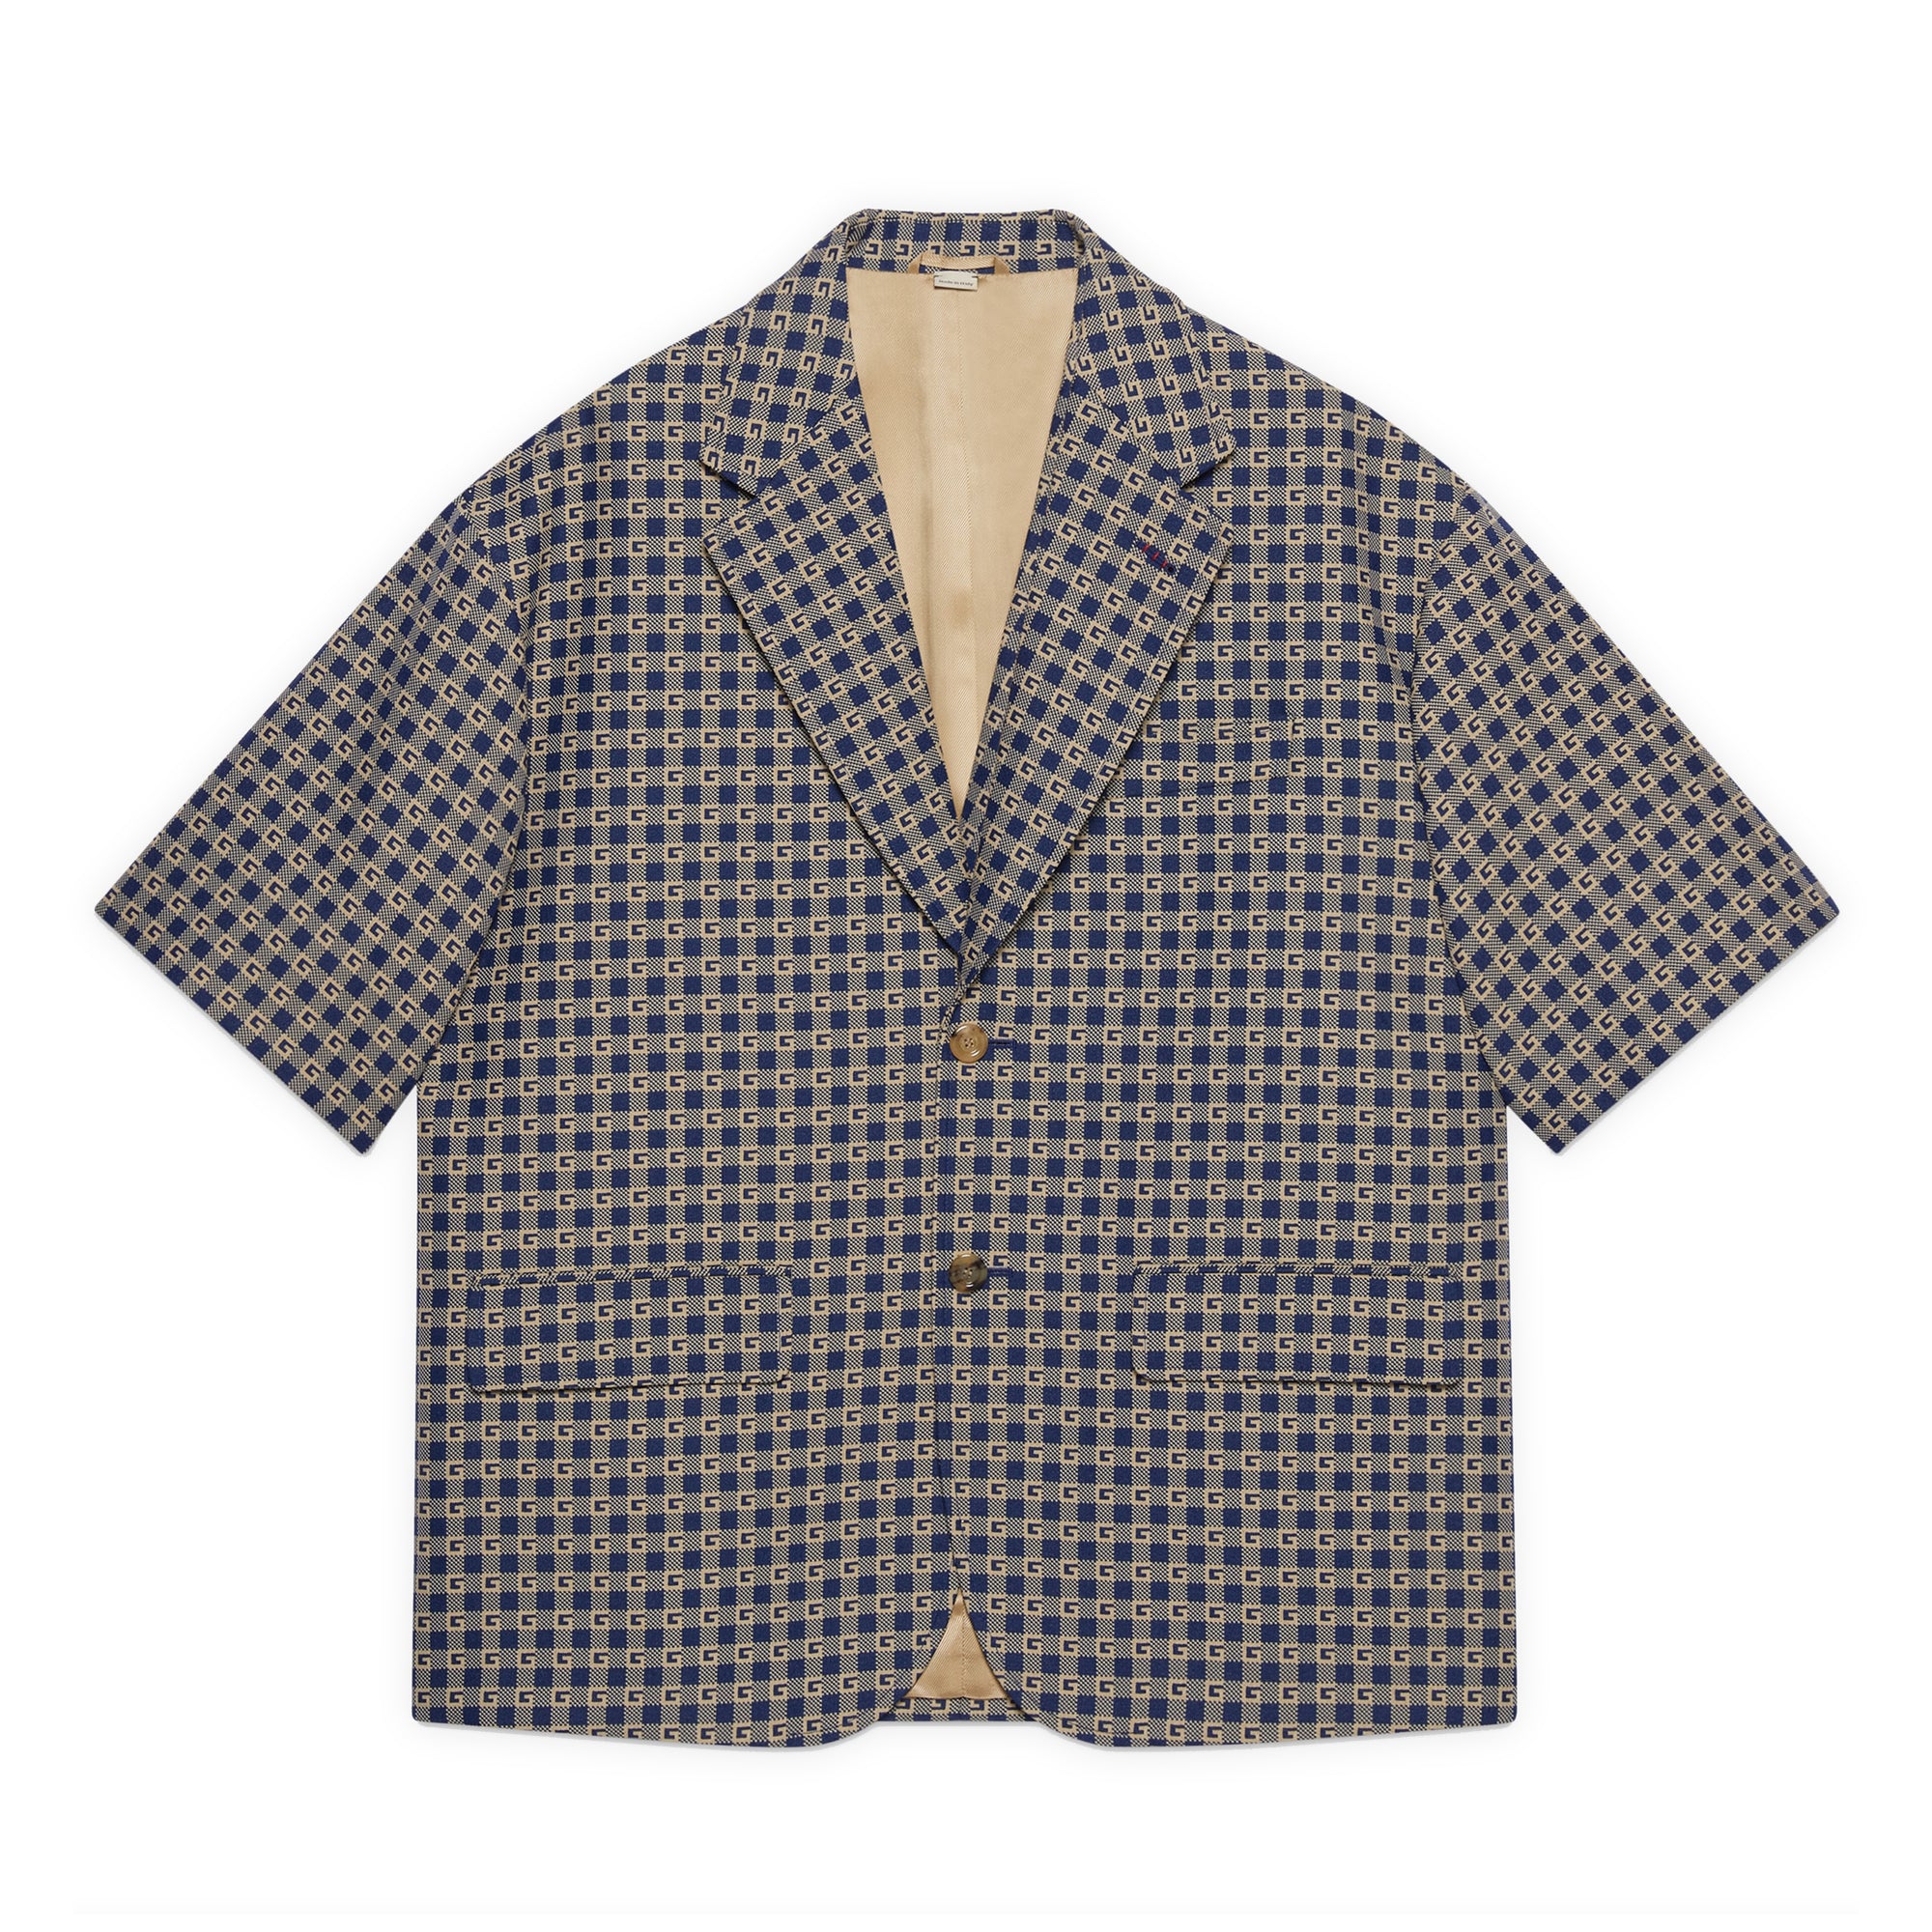 Gucci - Men’s Square G Check Fabric Formal Jacket - (Blue/Beige) view 1